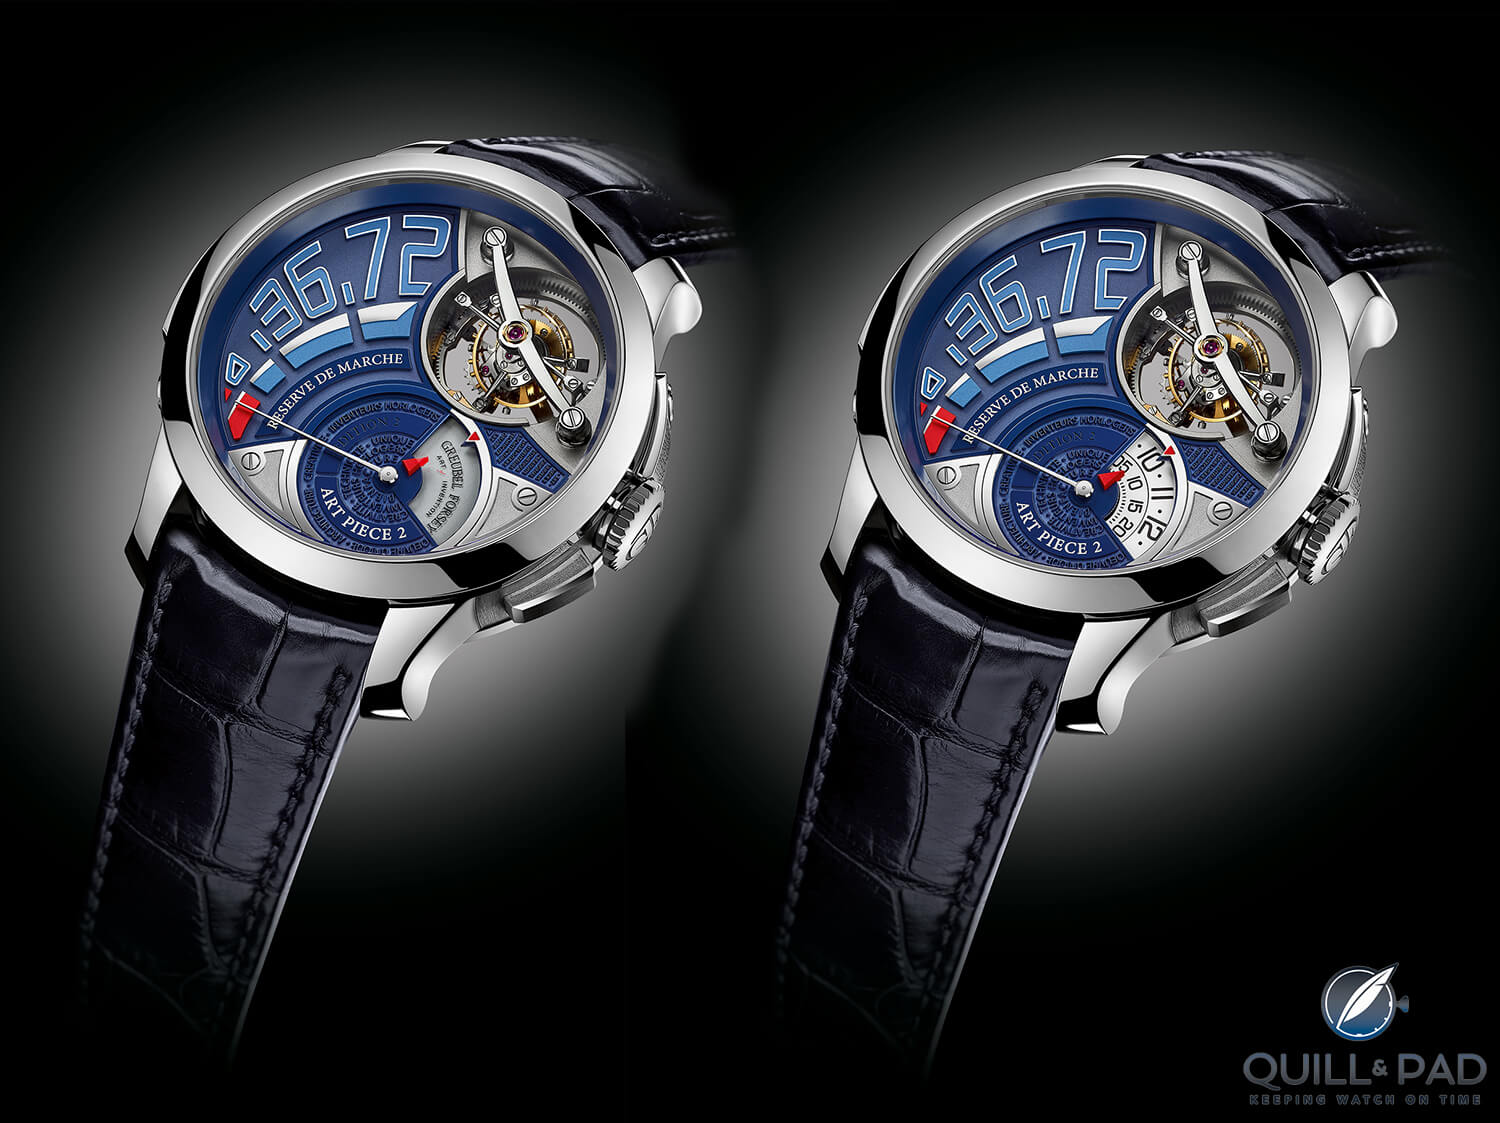 Greubel Forsey Art Piece 2 Edition 2 with time display closed (left) and time display open (right)